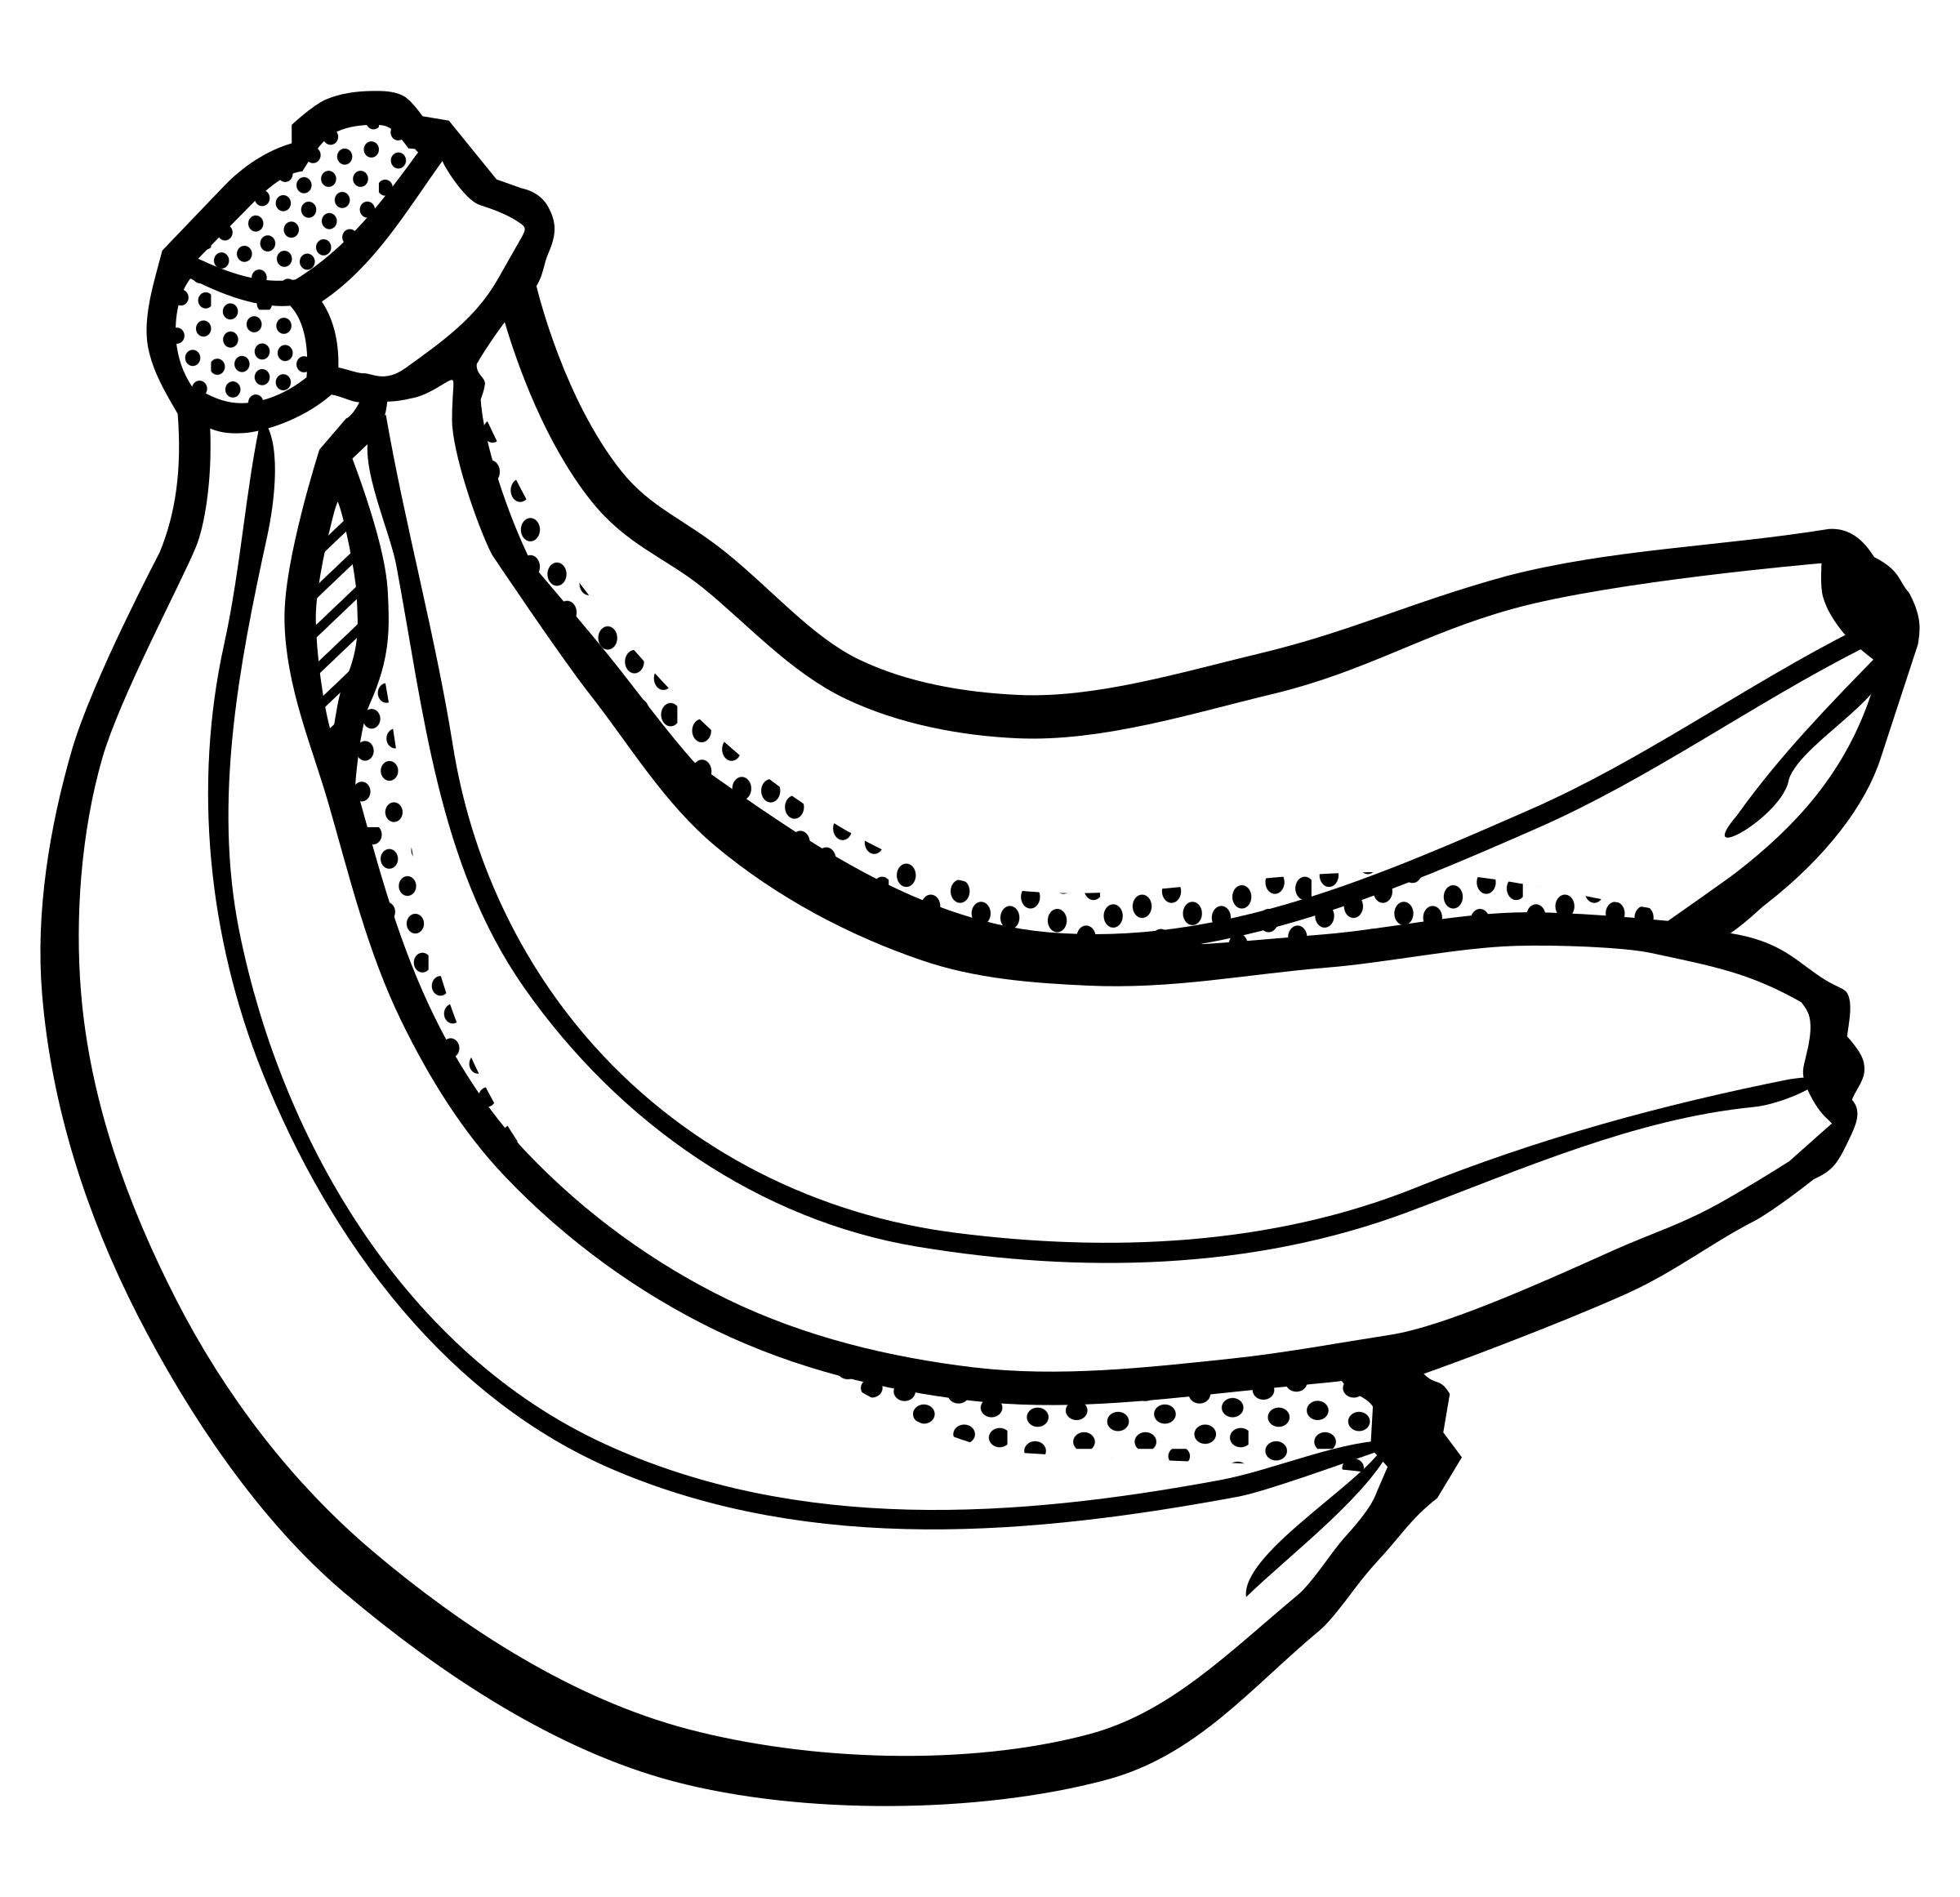 bunch of bananas - lineart png